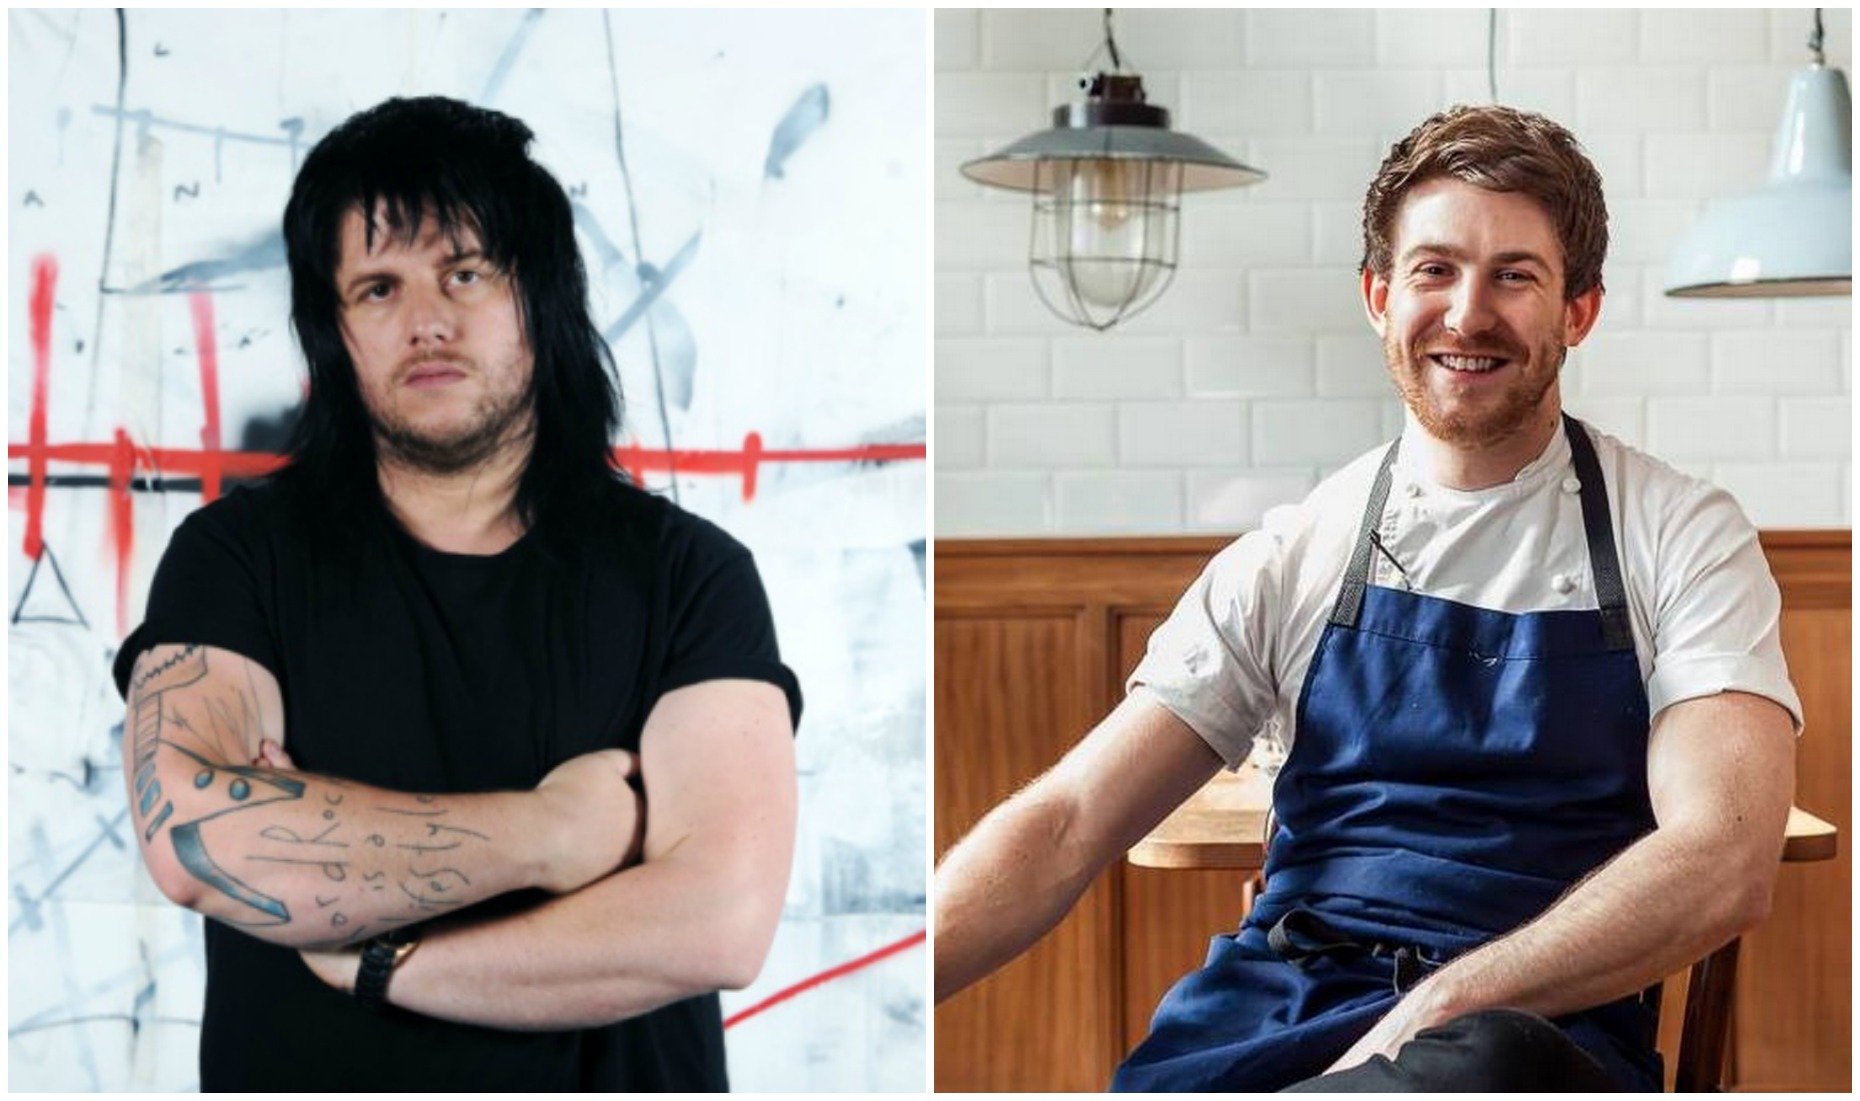 Michael O’Hare (left) will be cooking alongside Le Westcott. 